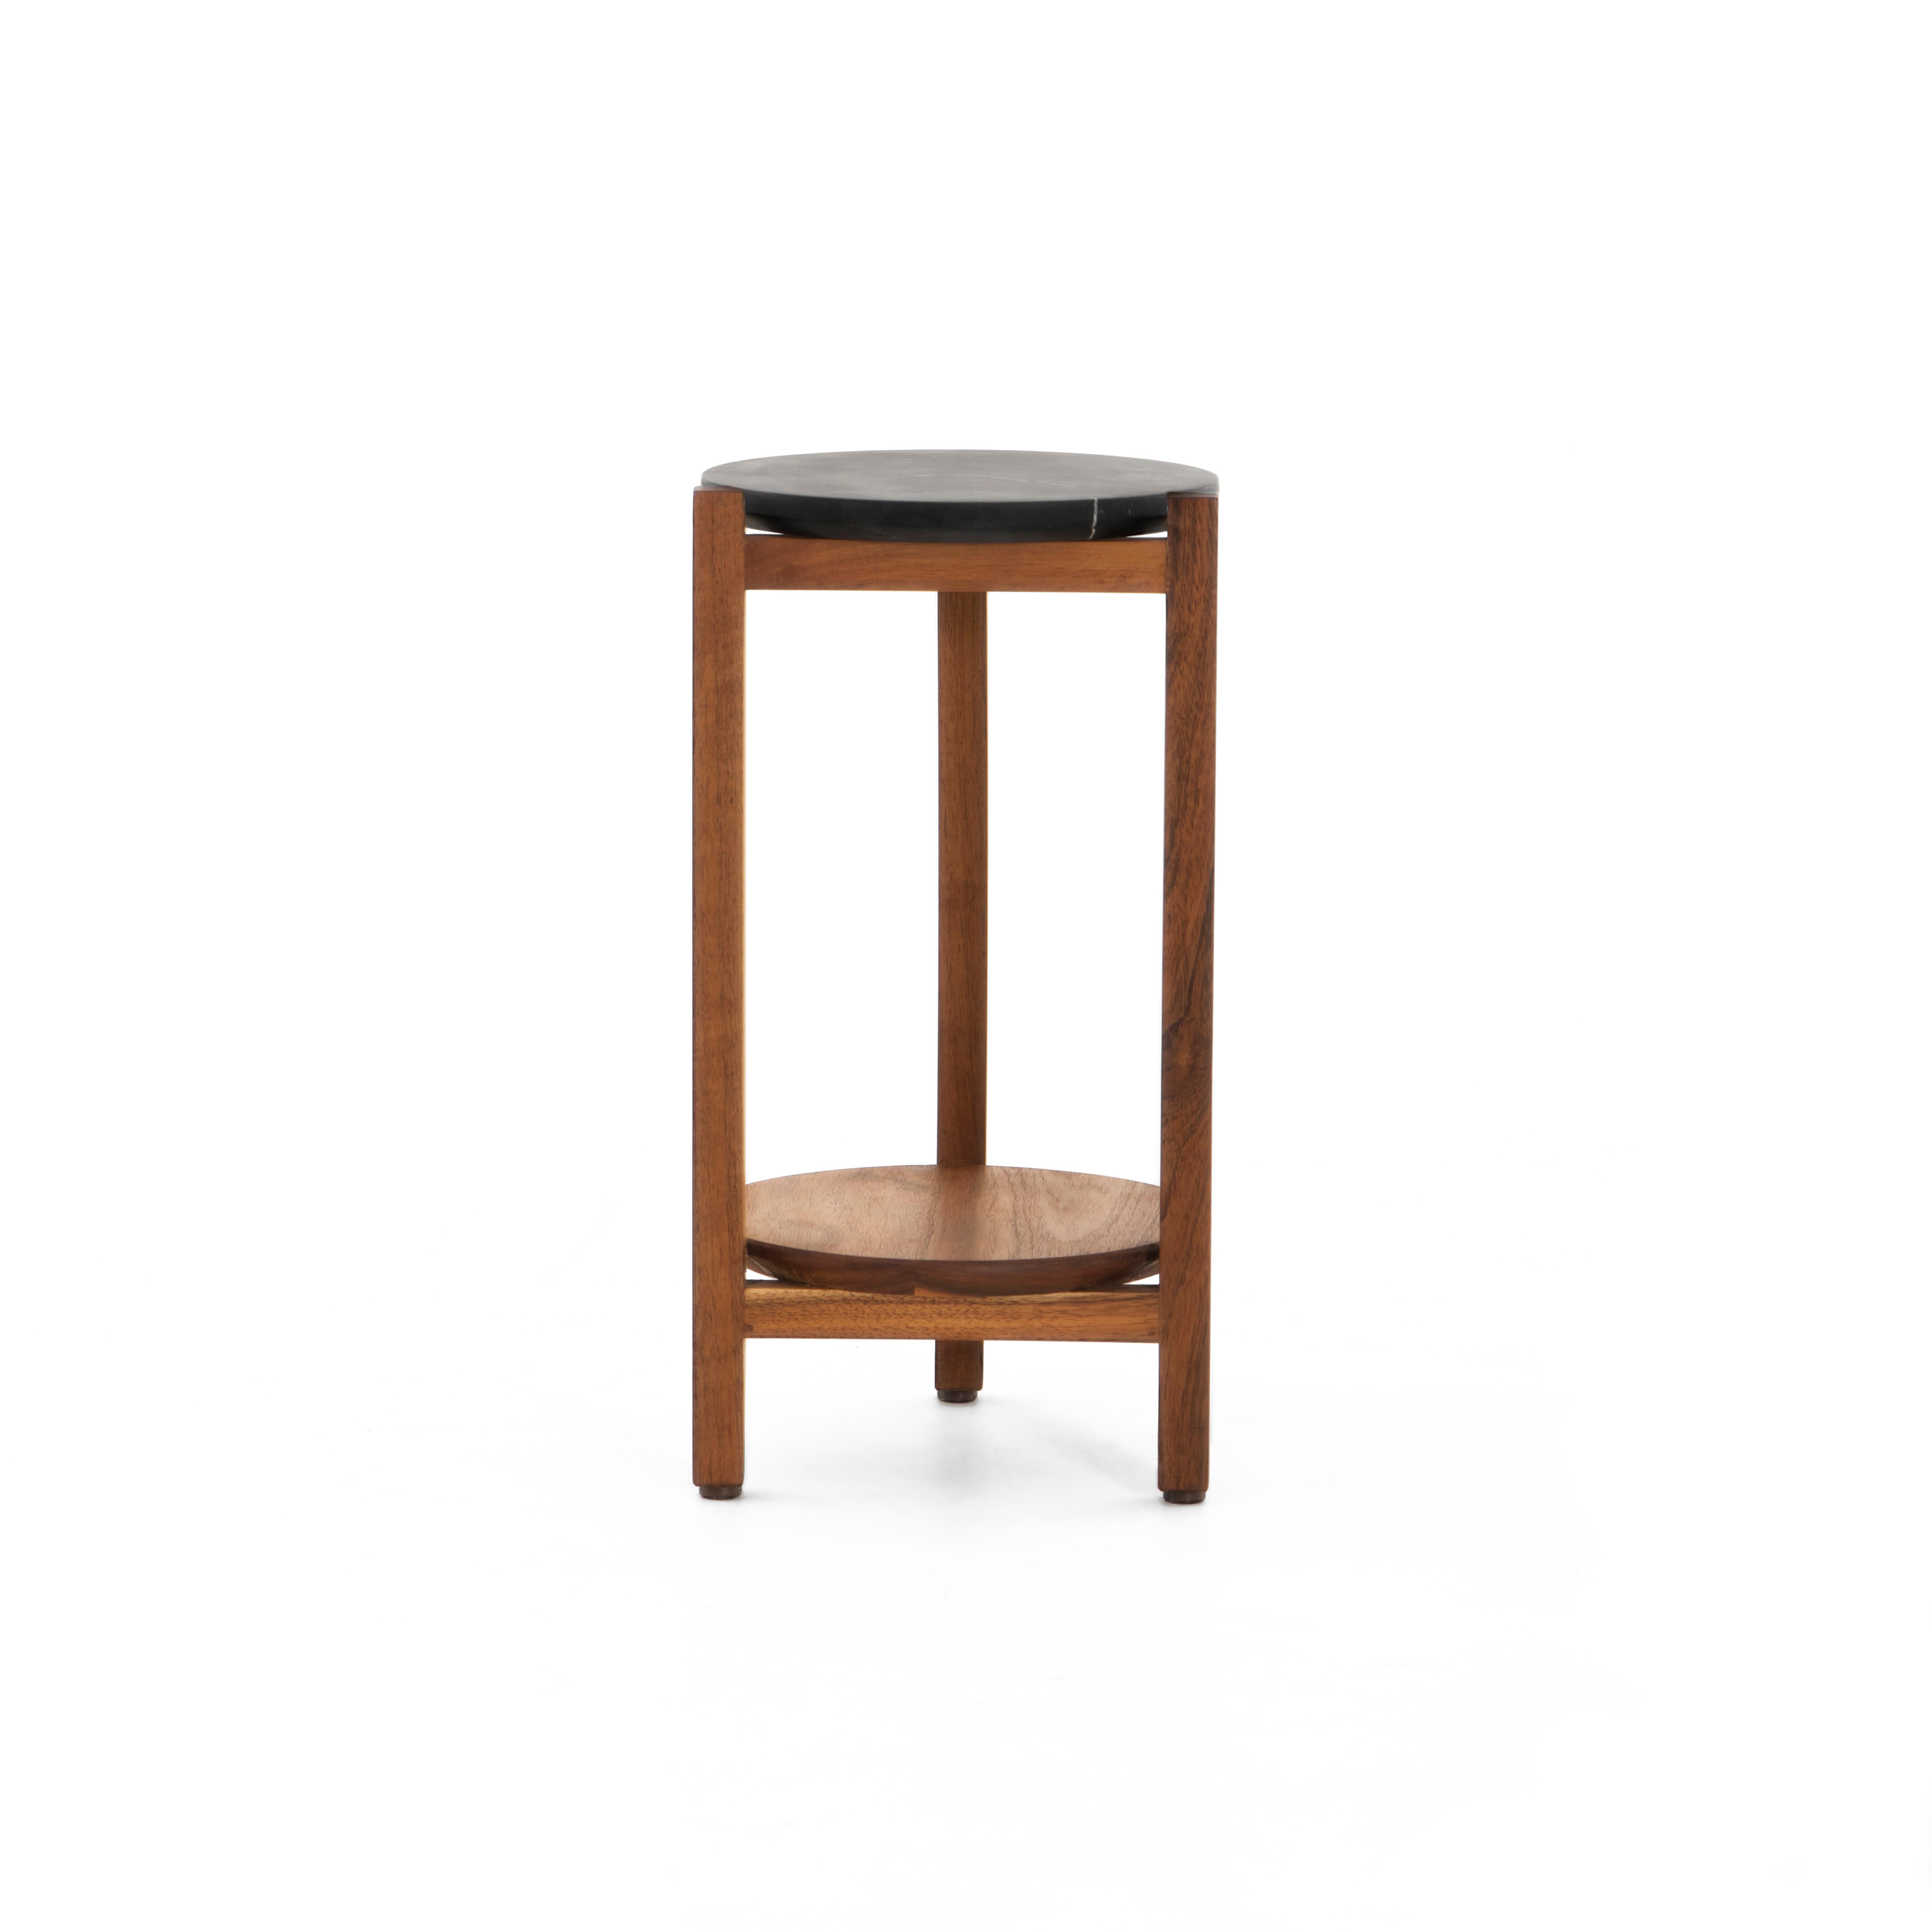 Modern Mesa Auxiliar B, Mexican Contemporary Side Table by Emiliano Molina for Cuchara For Sale